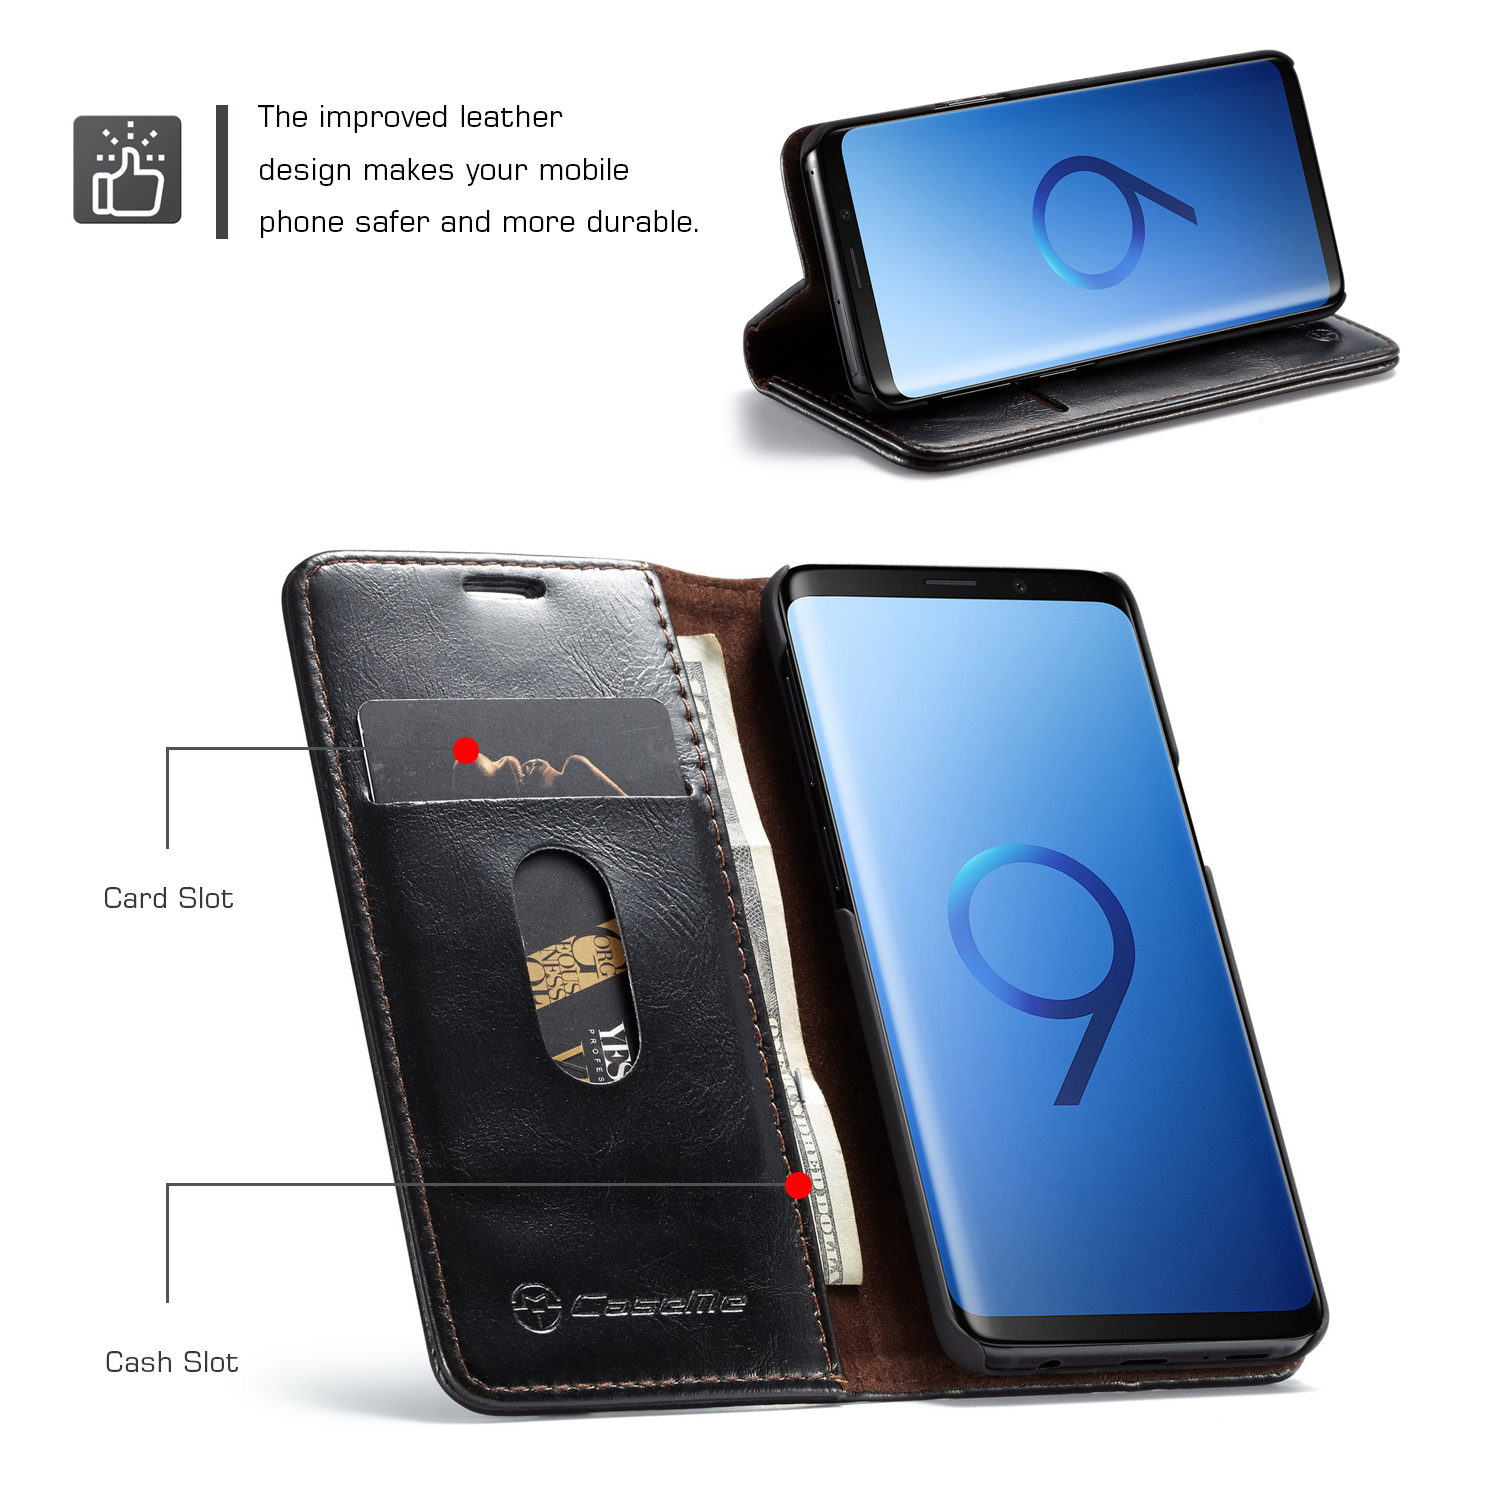 Caseme-Wallet-Kickstand-Protective-Case-For-Samsung-Galaxy-S9-Magnetic-Flip-Card-Slots-1291821-1